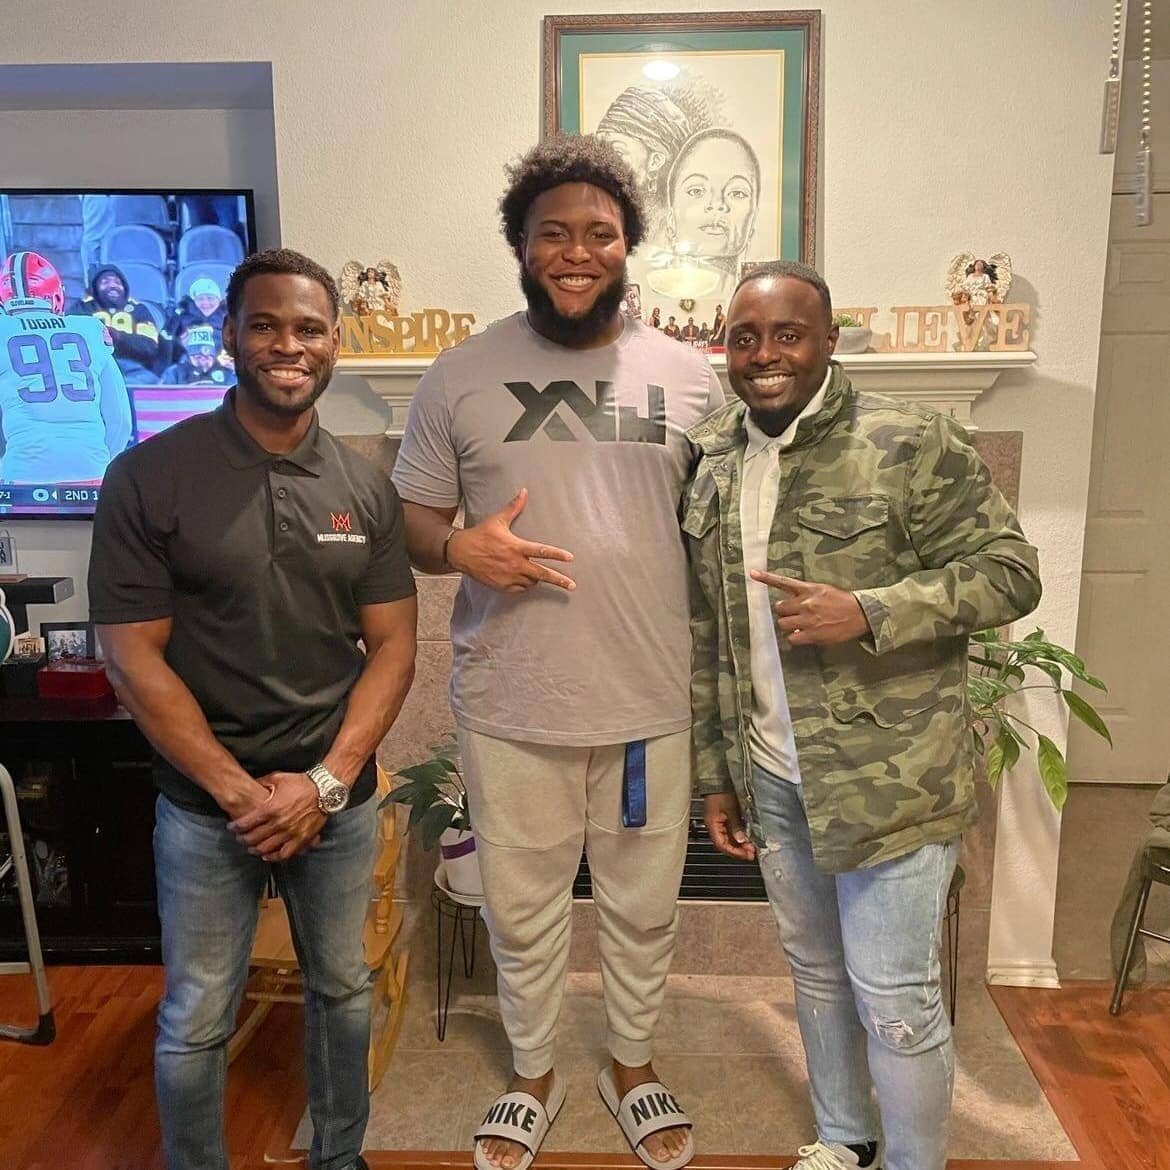 Happy to welcome Dallas very own Xavier Newman-Johnson ( @xaviernewman_ ) the #DesotoU / Baylor University alum as a new signee to Musgrove Agency. This is just the beginning my guy it&rsquo;s time to start the real work now. It&rsquo;s only up from 